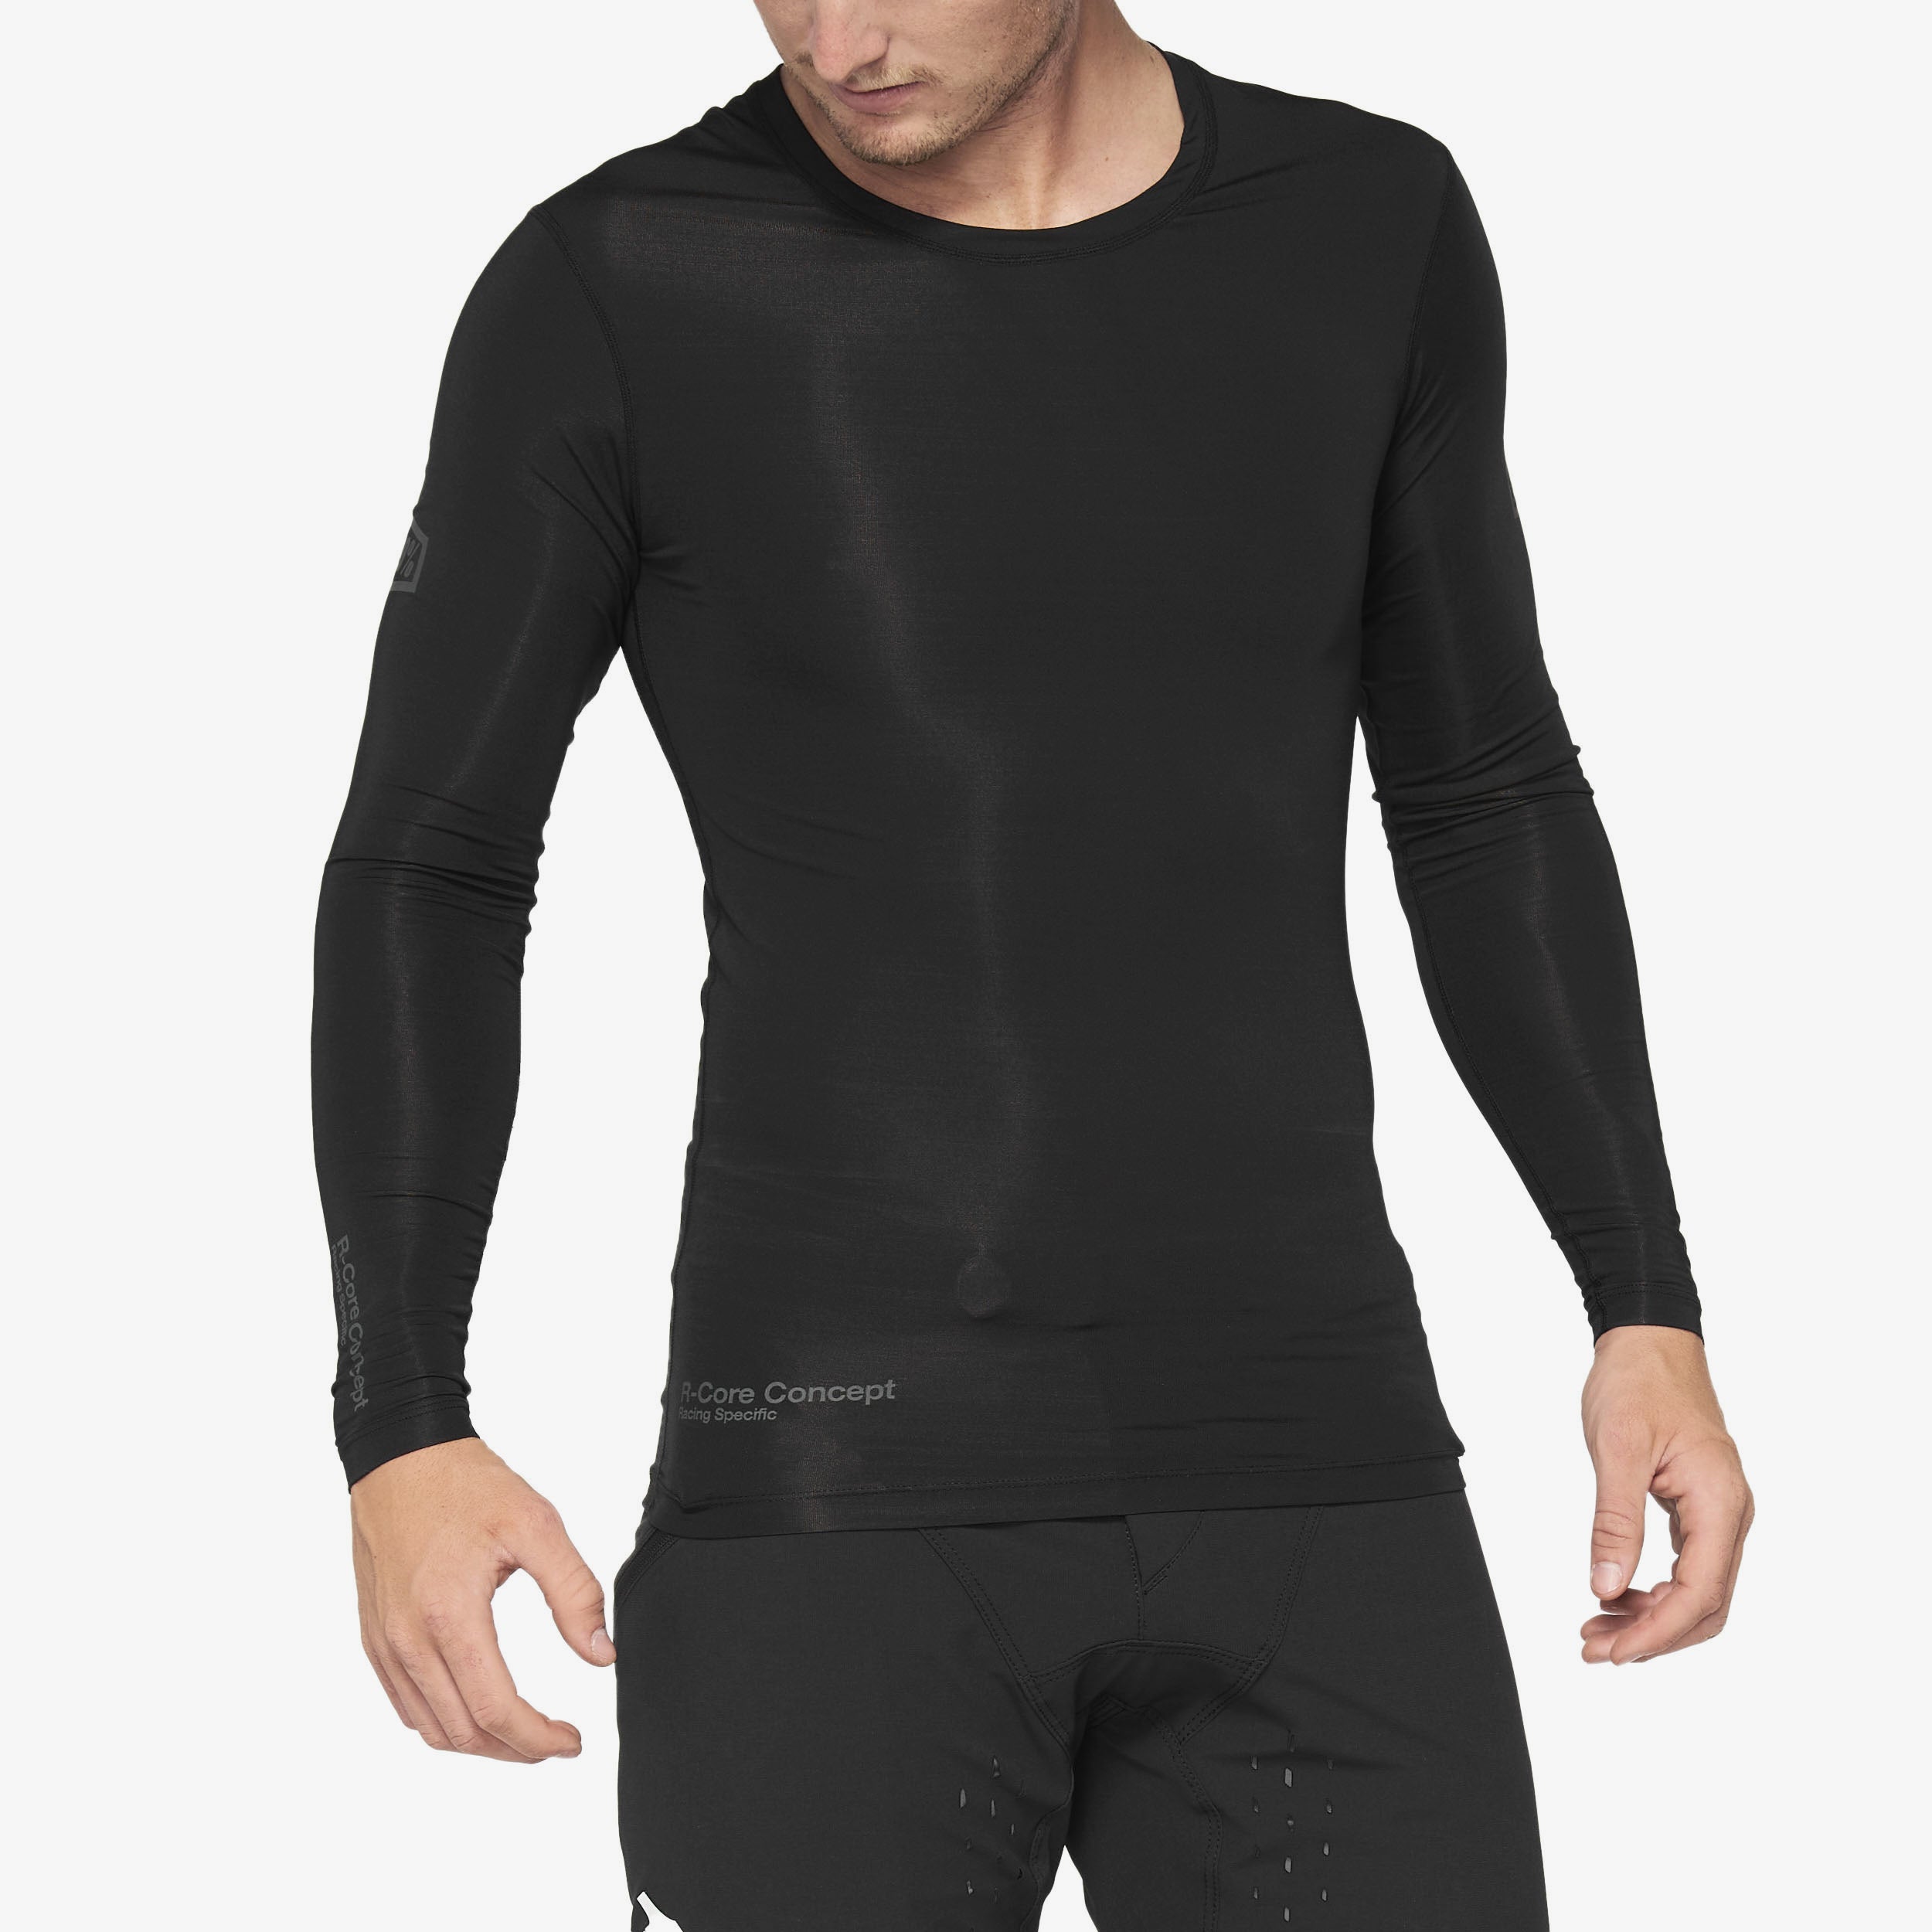 R-CORE CONCEPT Long Sleeve Jersey Black - Secondary